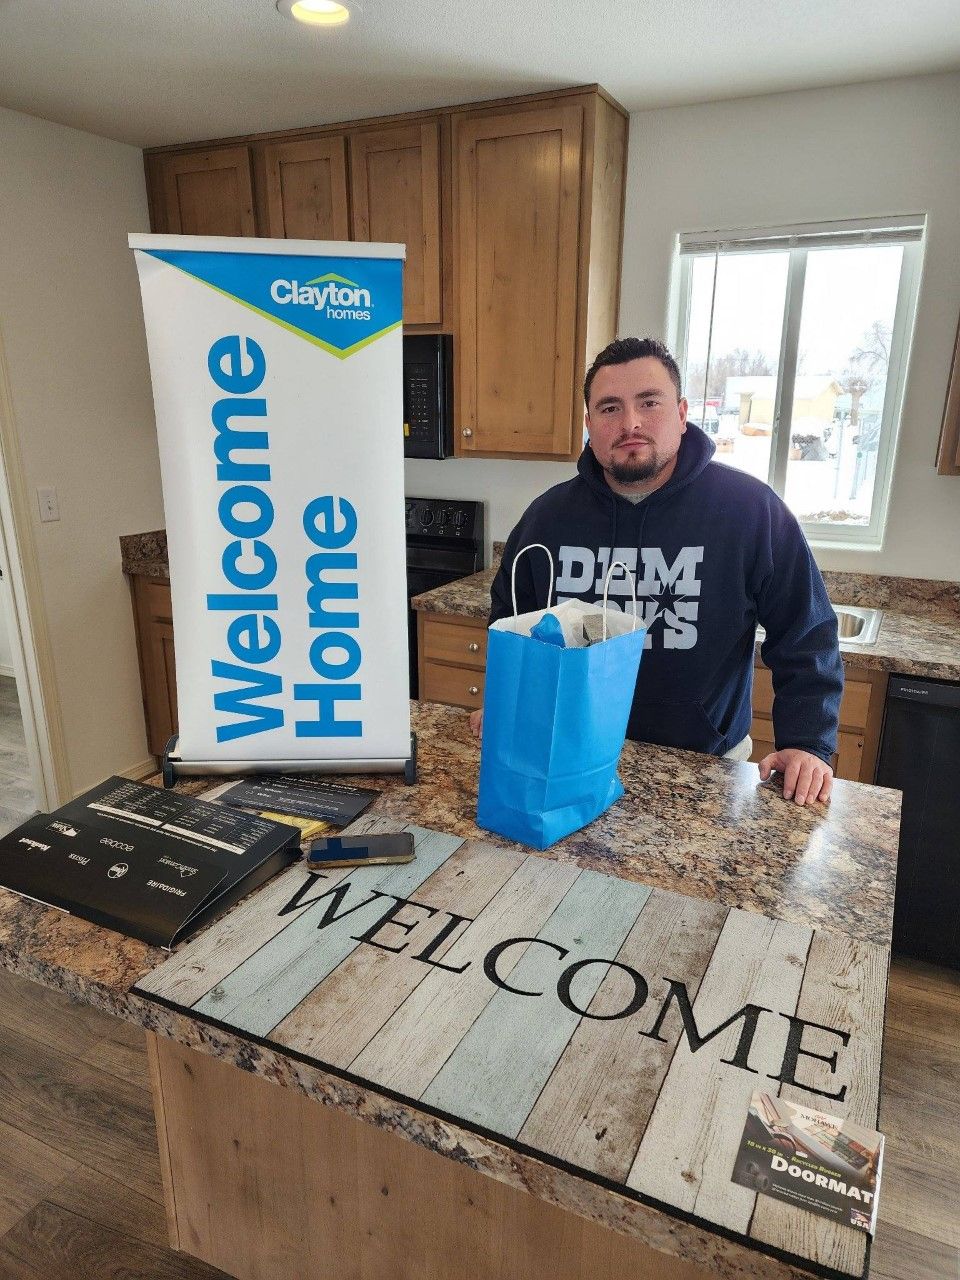 JOSE G. welcome home image